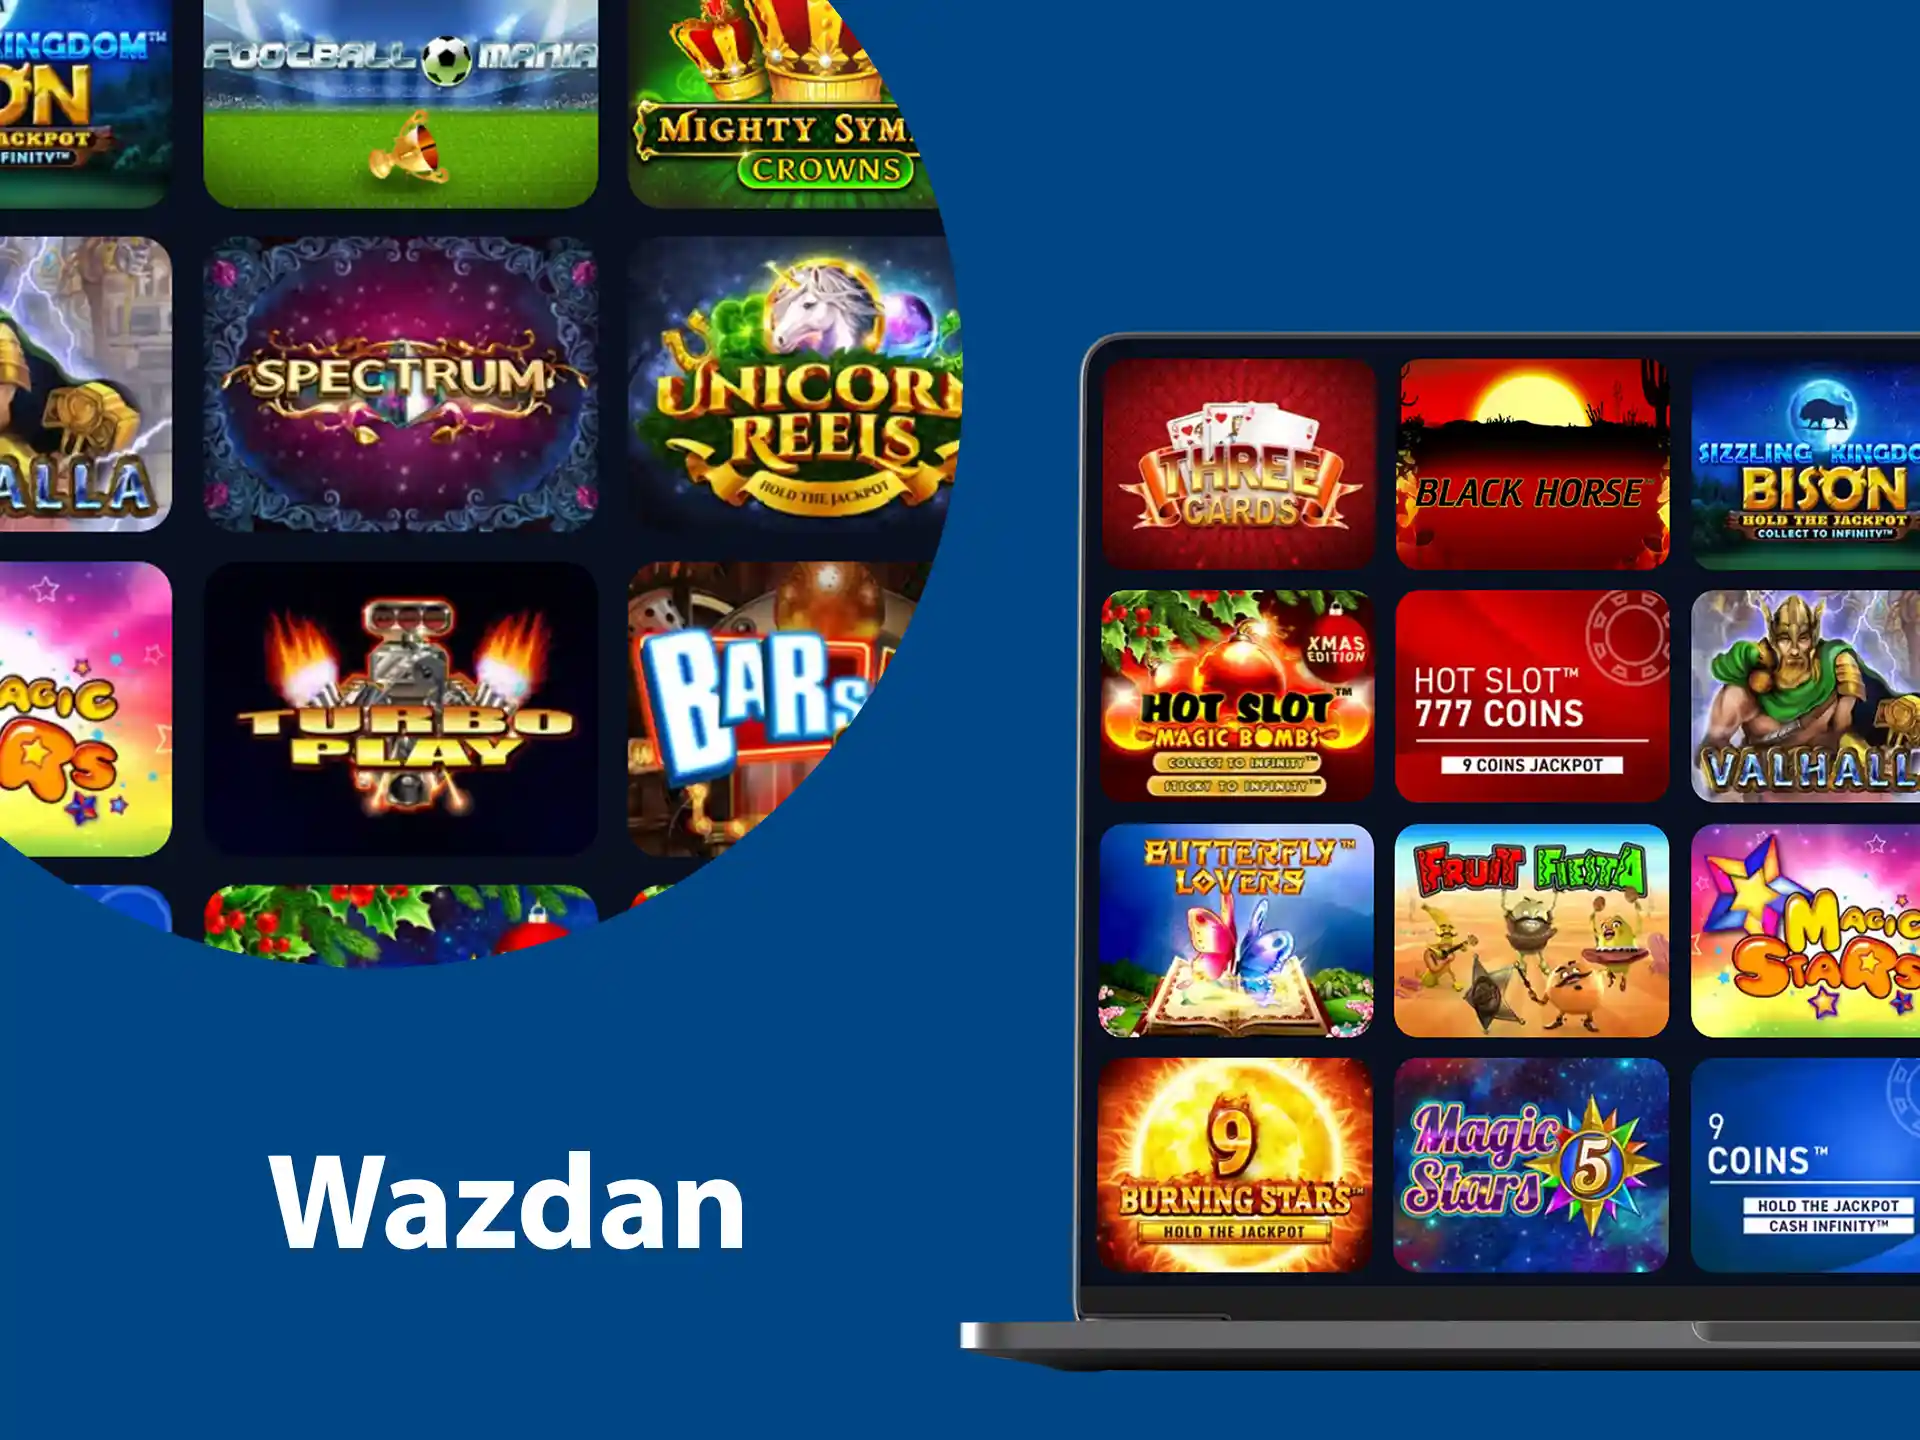 Wazdan creates exciting online games every year and differs from other developers with special elements.